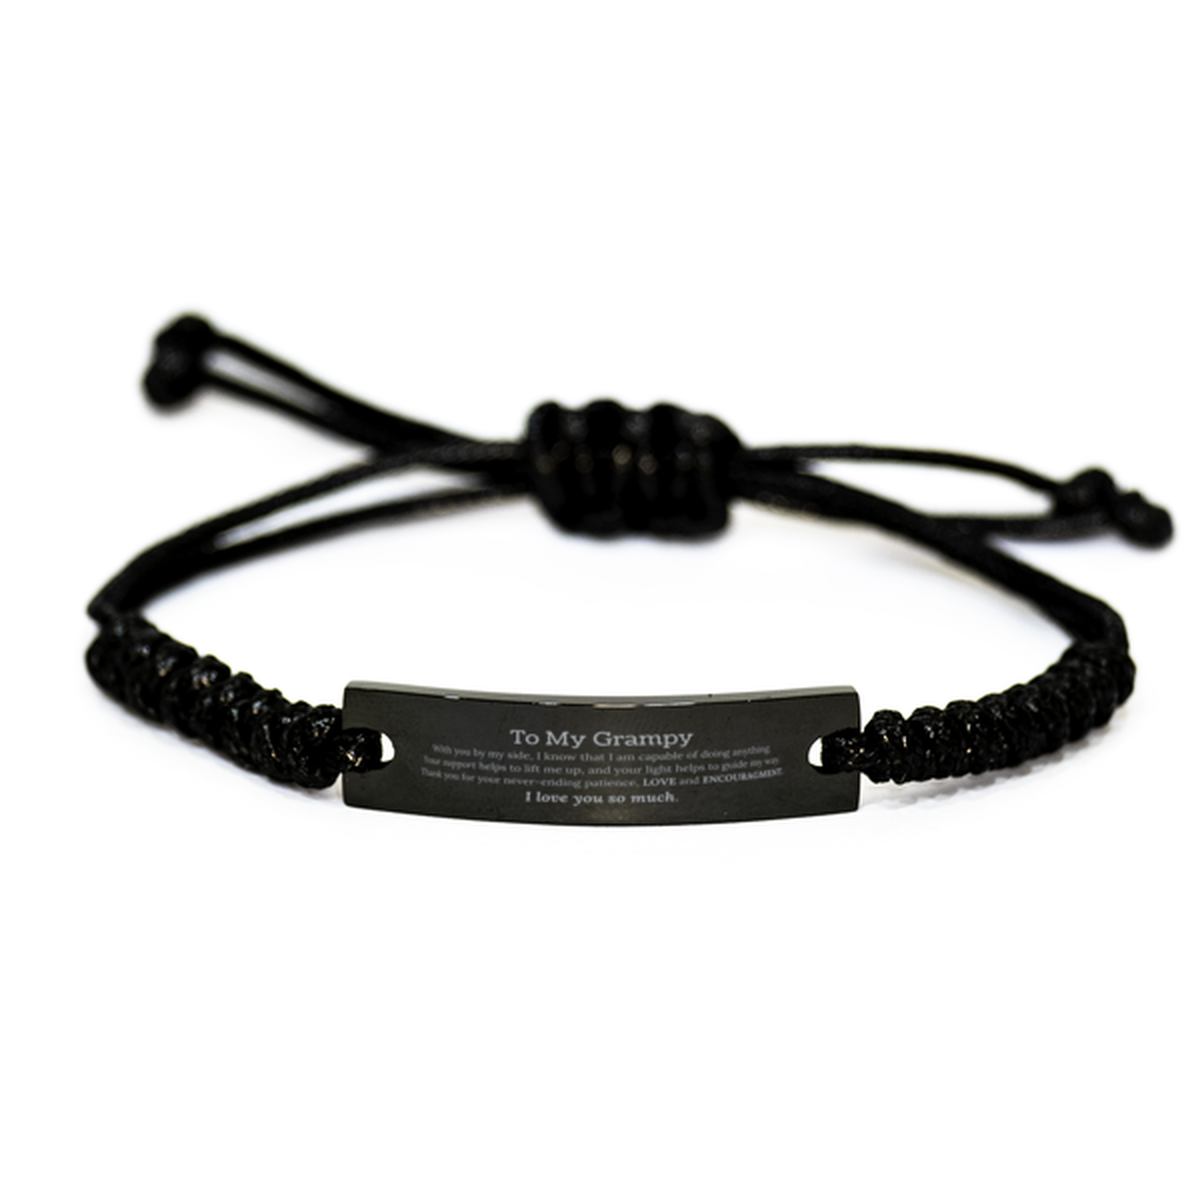 Appreciation Grampy Black Rope Bracelet Gifts, To My Grampy Birthday Christmas Wedding Keepsake Gifts for Grampy With you by my side, I know that I am capable of doing anything. I love you so much